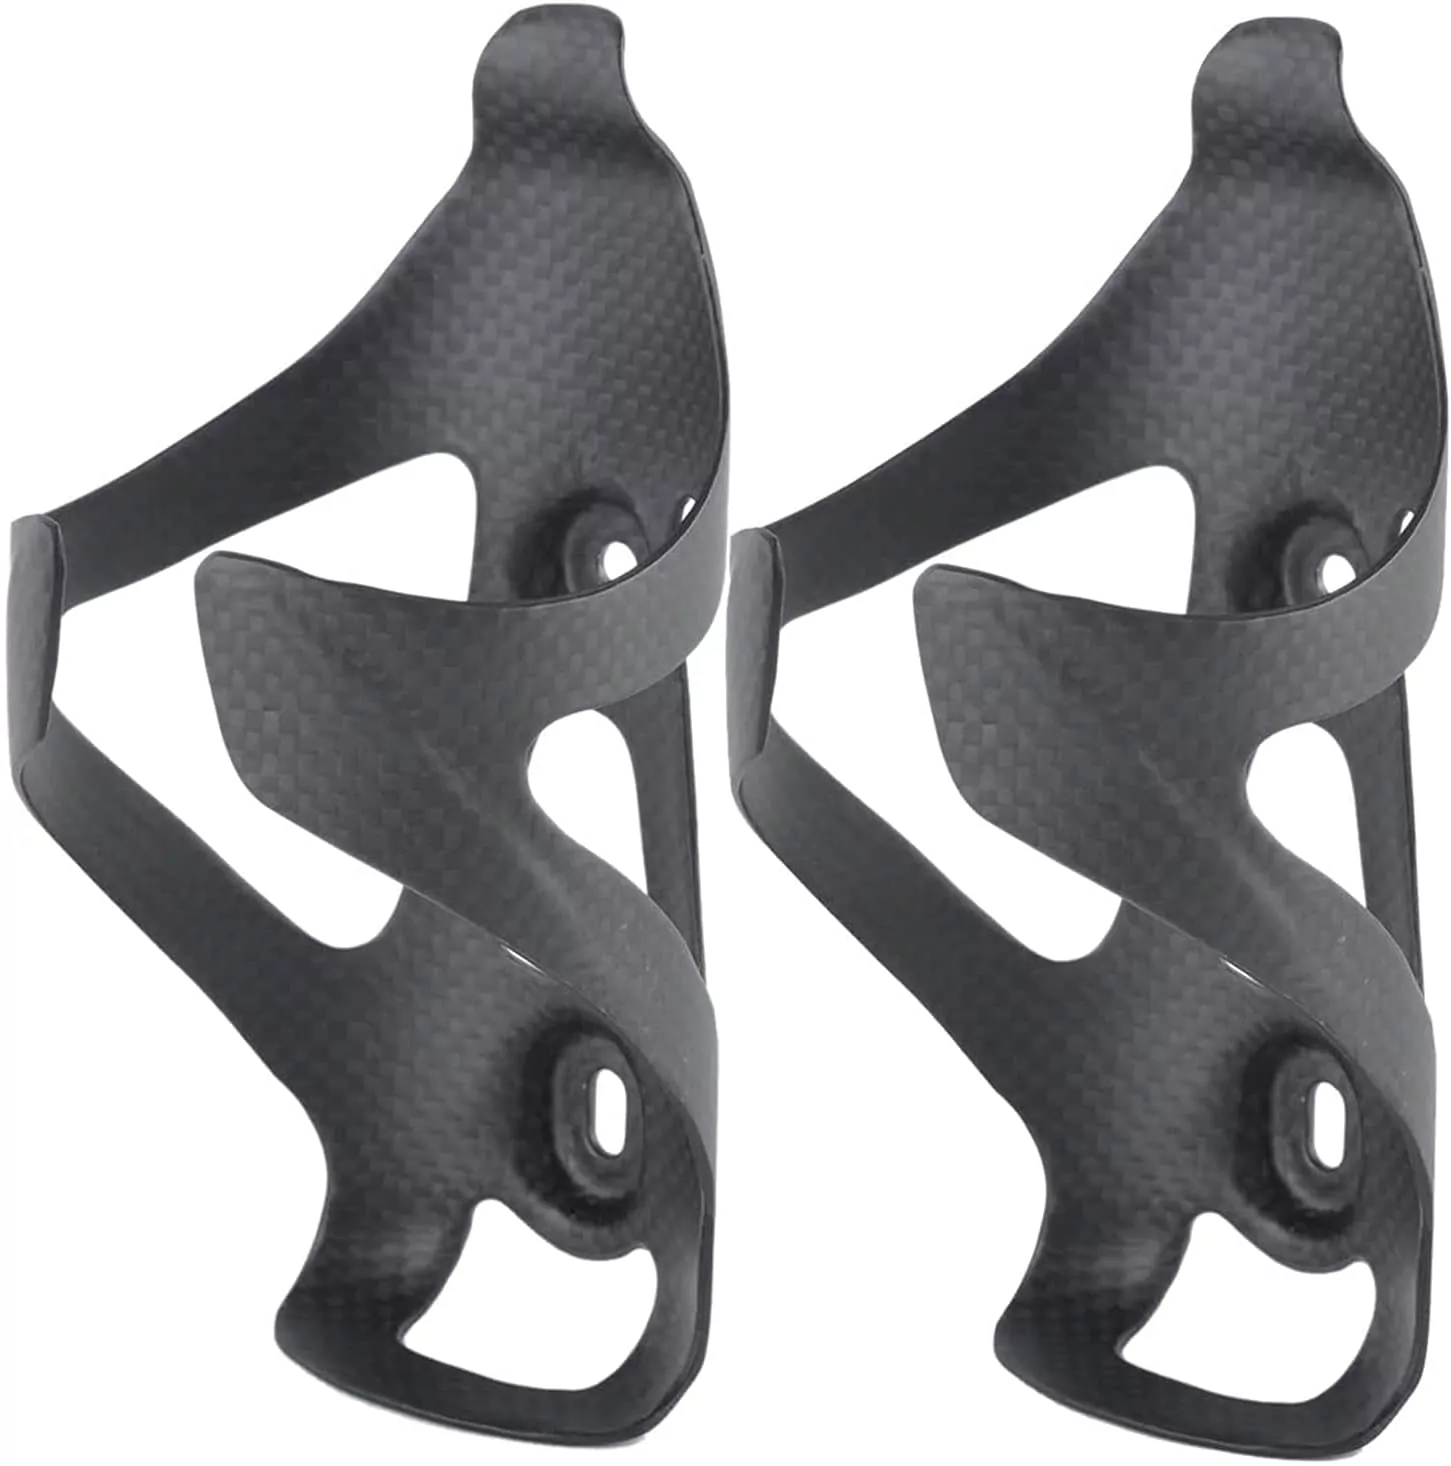 Anjoy Carbon bike water bottle Cage 